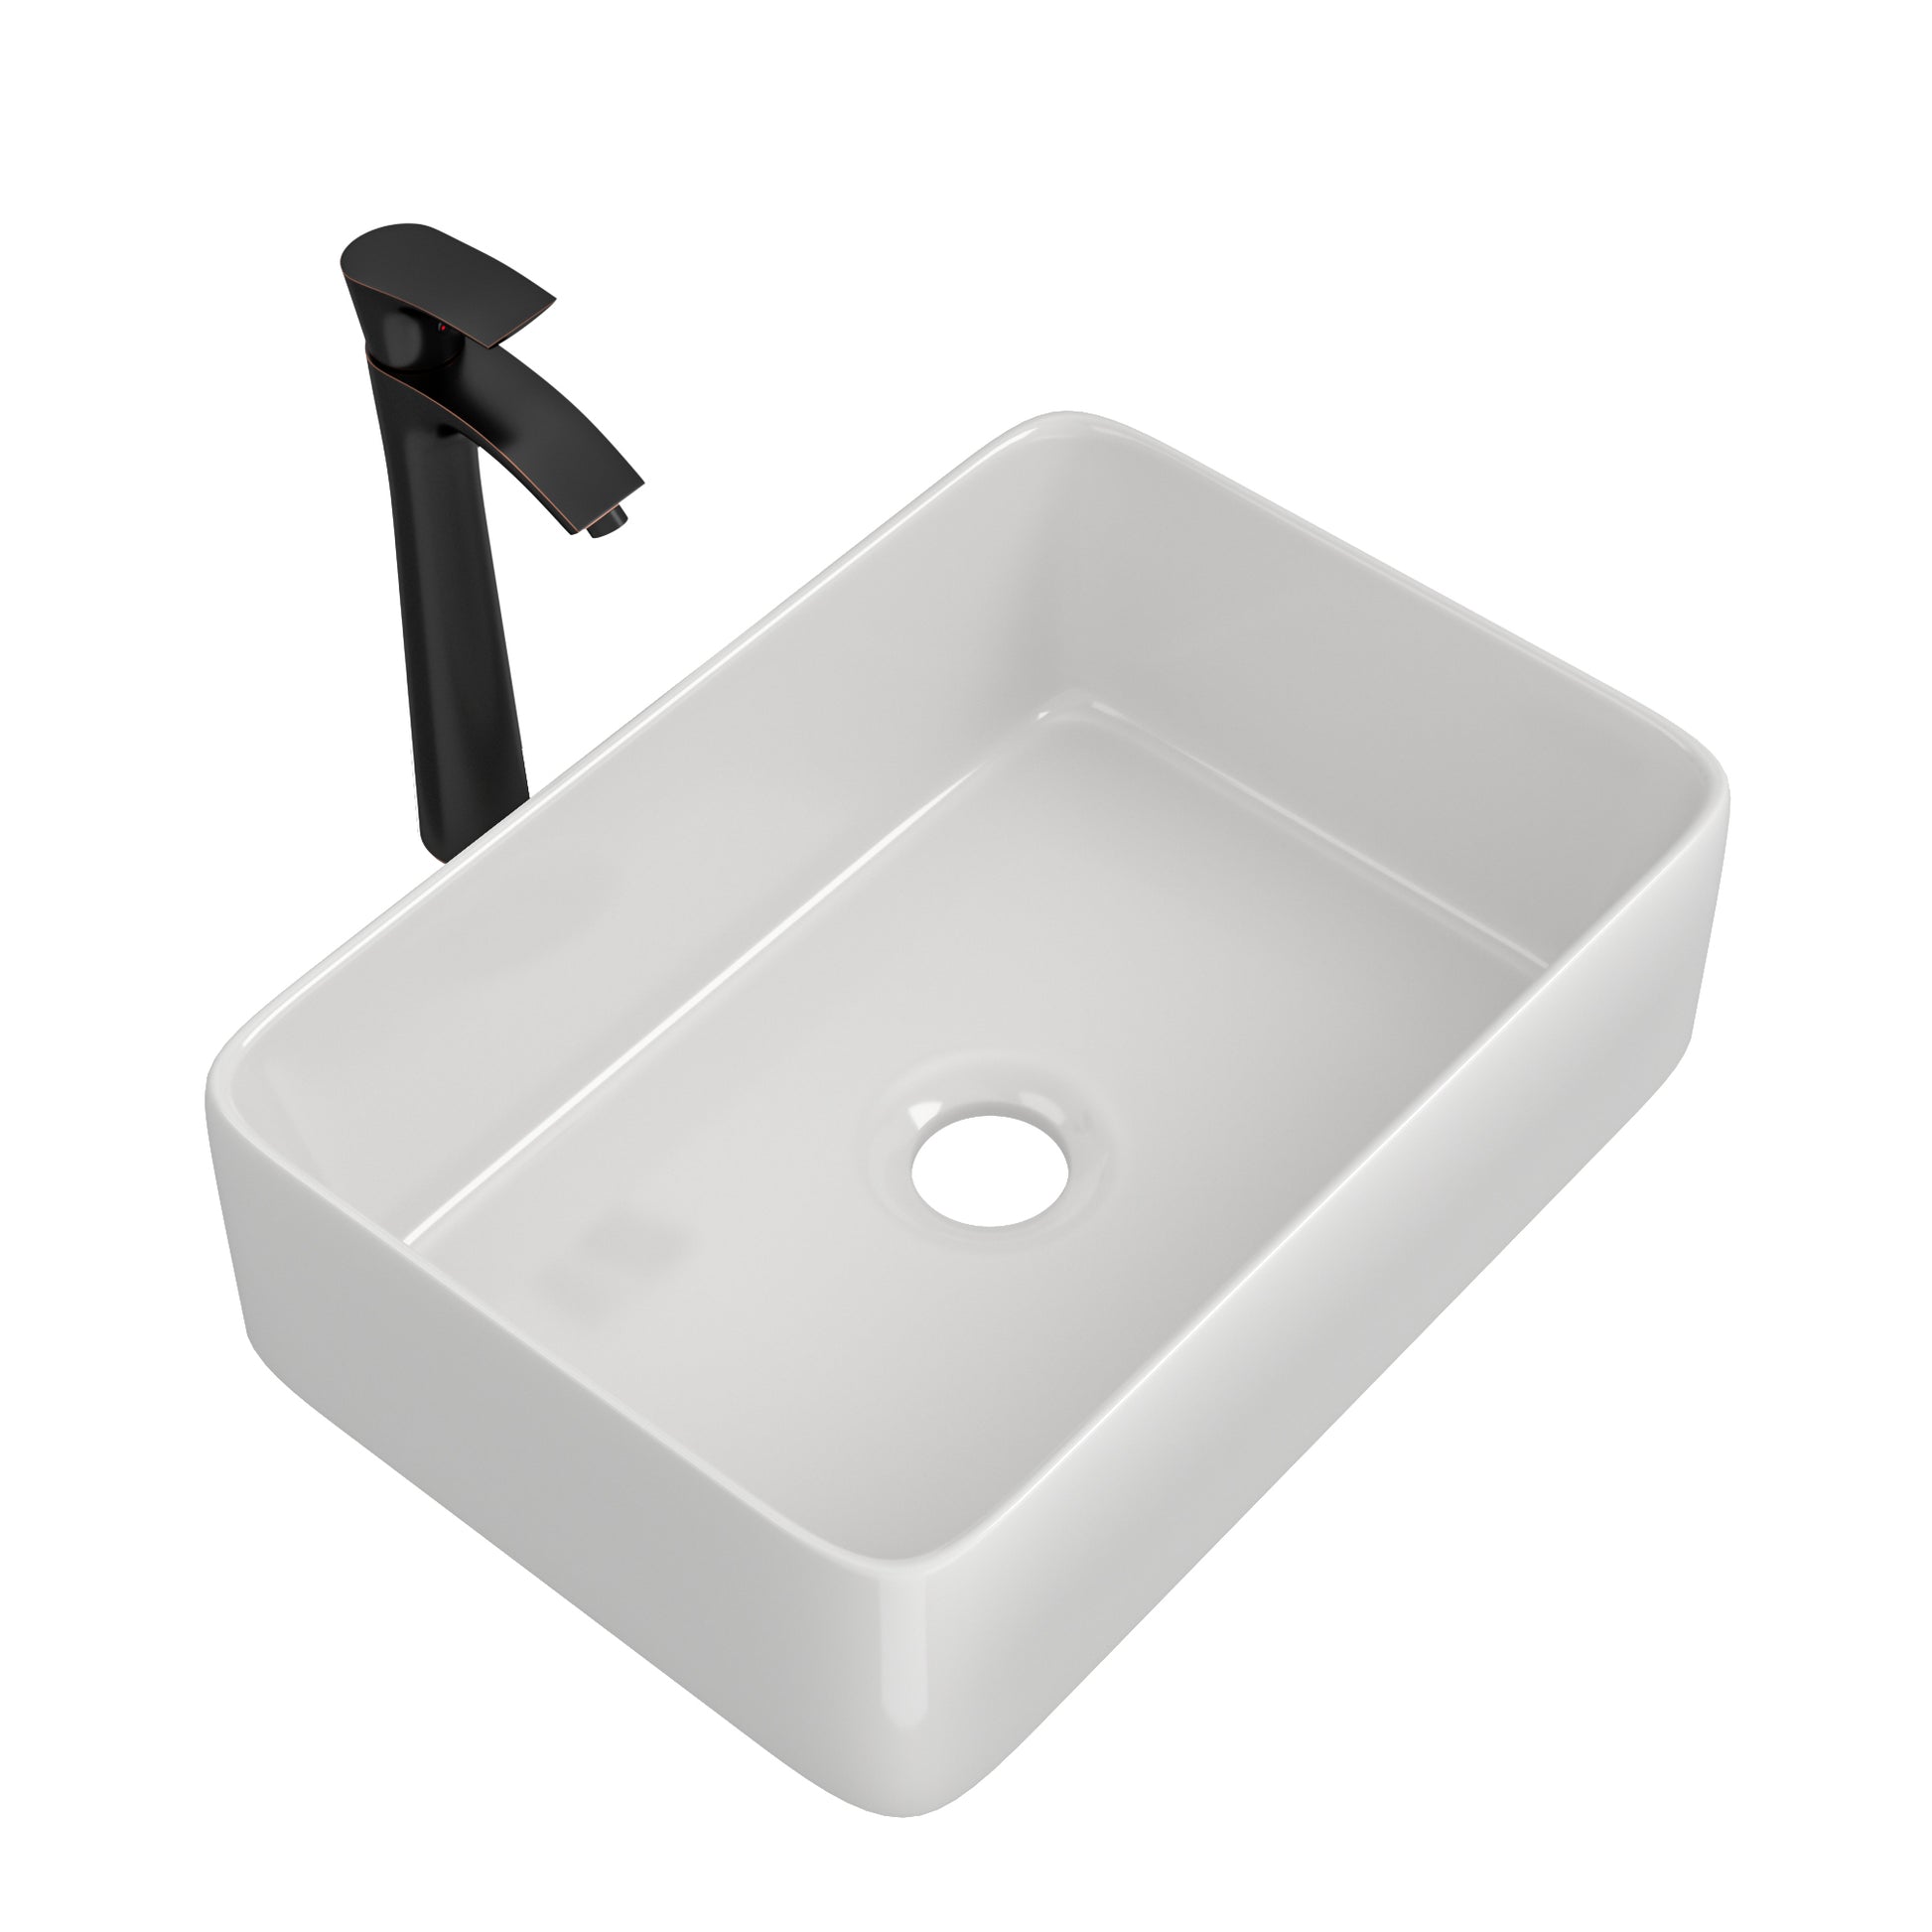 19"x15" Rectangle Bathroom Sink and Faucet Combo white-ceramic